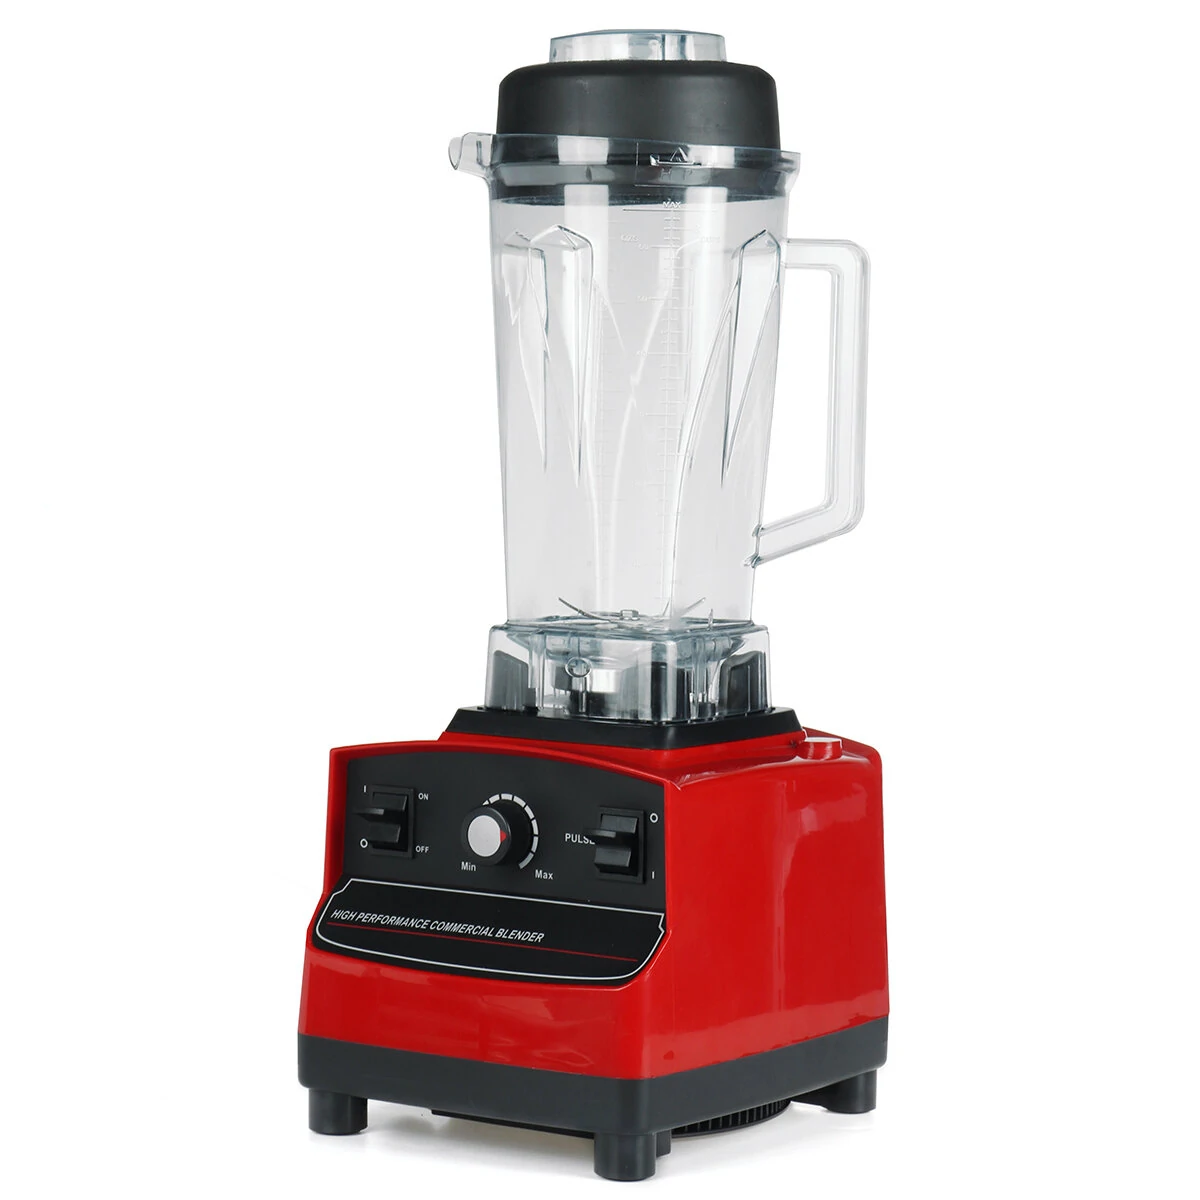 AUGEINB BL-4 1350W Countertop Blender 2L 18 Speed Adjustment 6 Blades Electric Mixer for Most Common Blender Creations - Black & Red